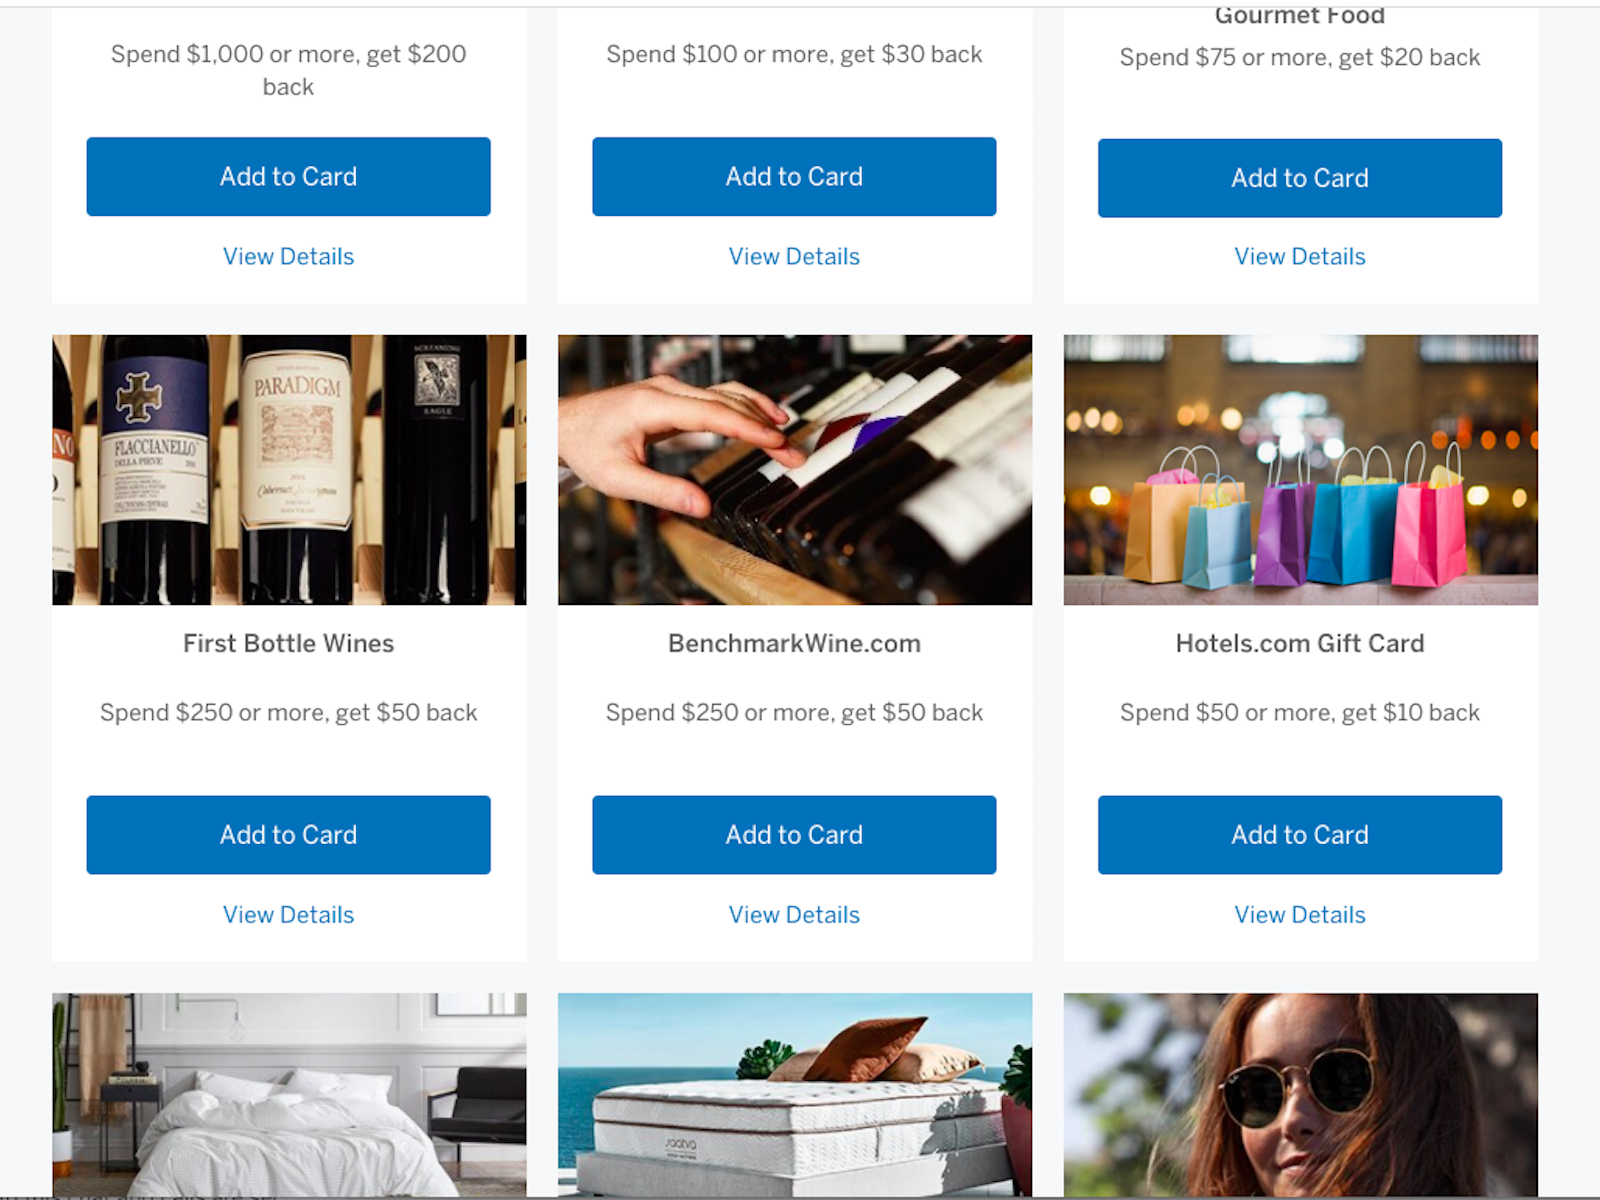 Third-party Amex Offers for American Express cards issued by other banks 